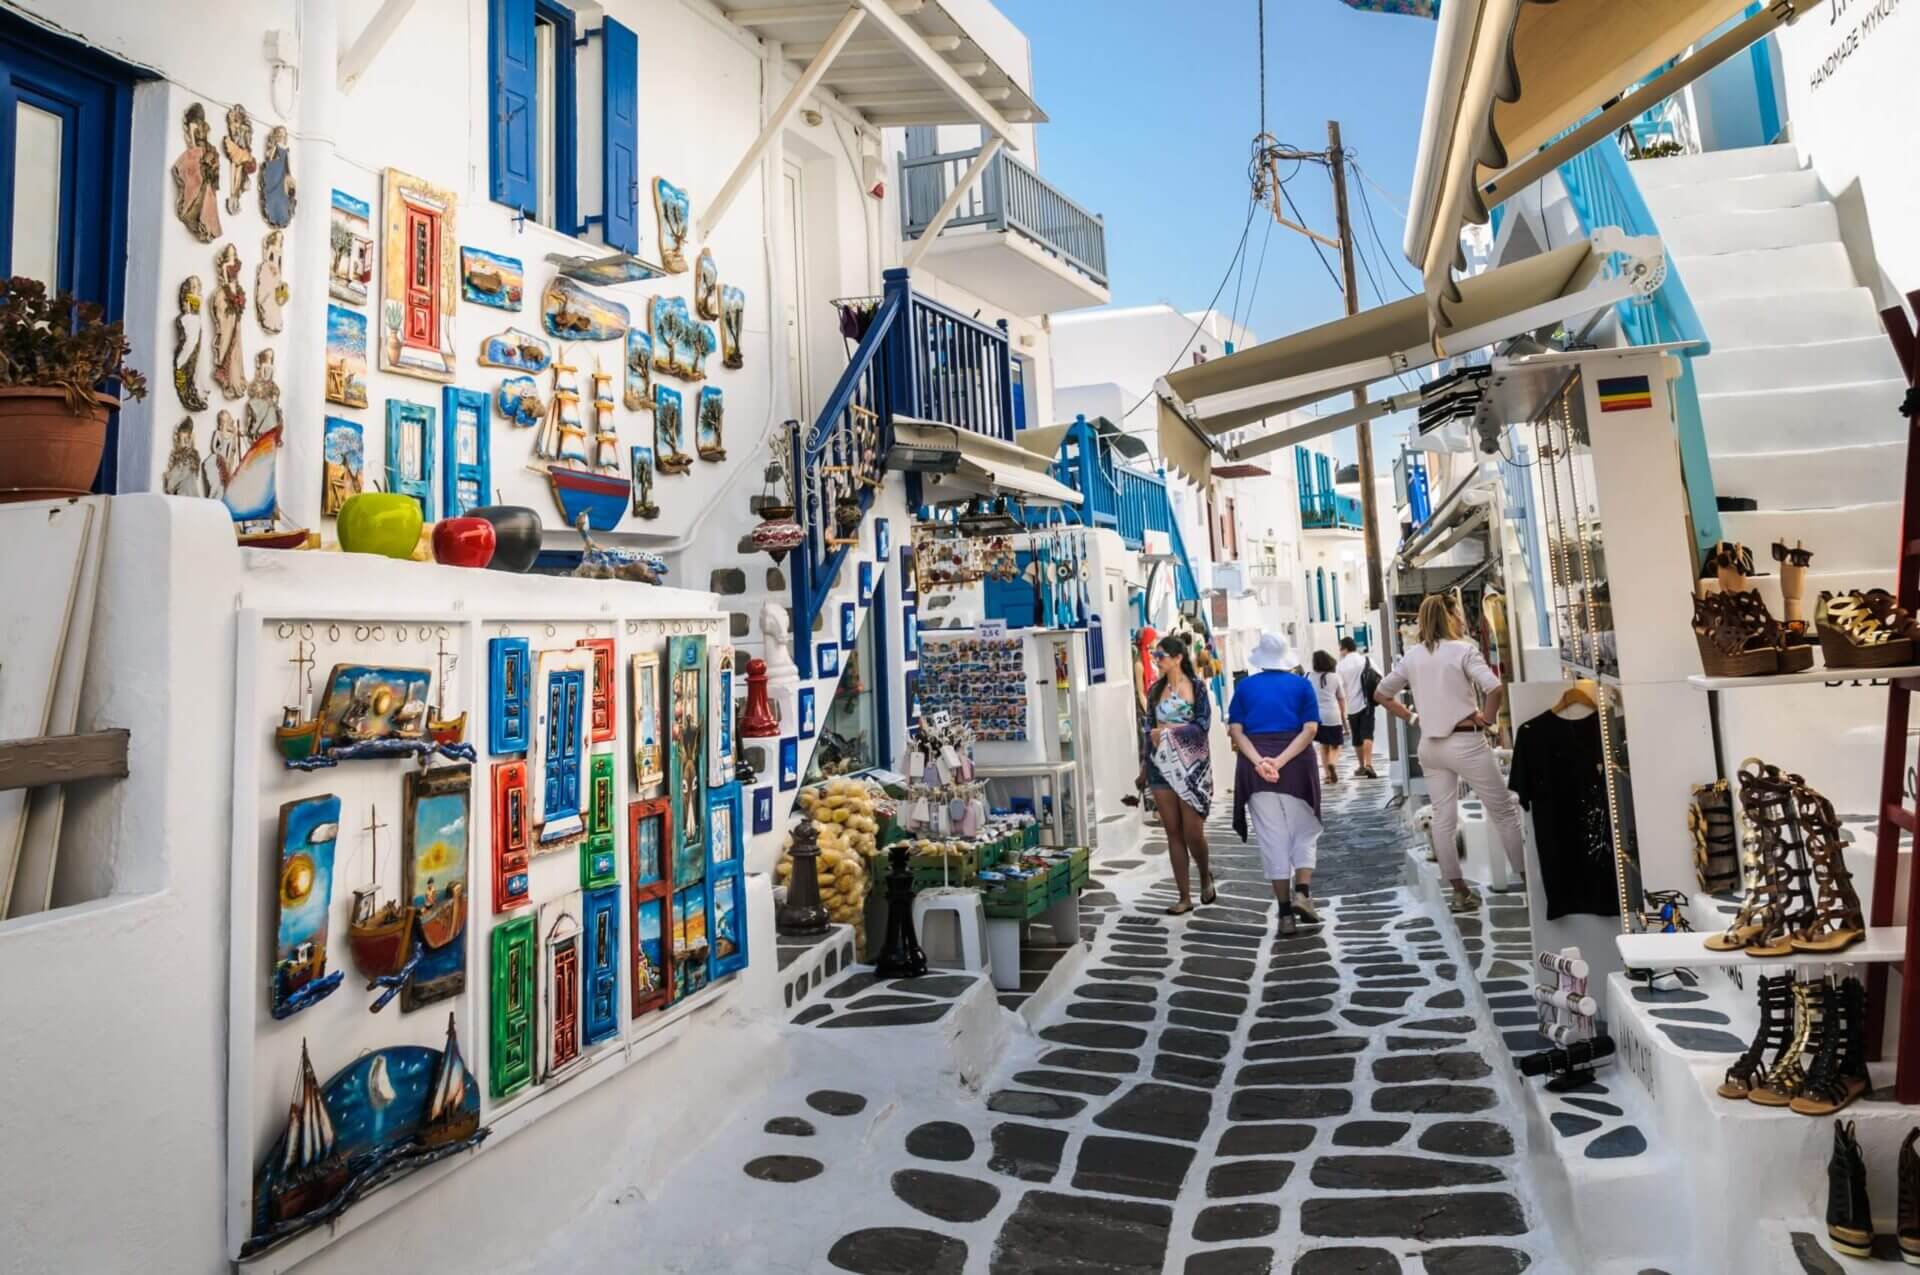 mykonos-greece-may-8-2018-shoppers-explore-the-narrow-alleys-of-mykonos-town-where-colorful-merchandise-is-displayed-in-hopes-of-catching-a-tourists-eye-stockpack-istock